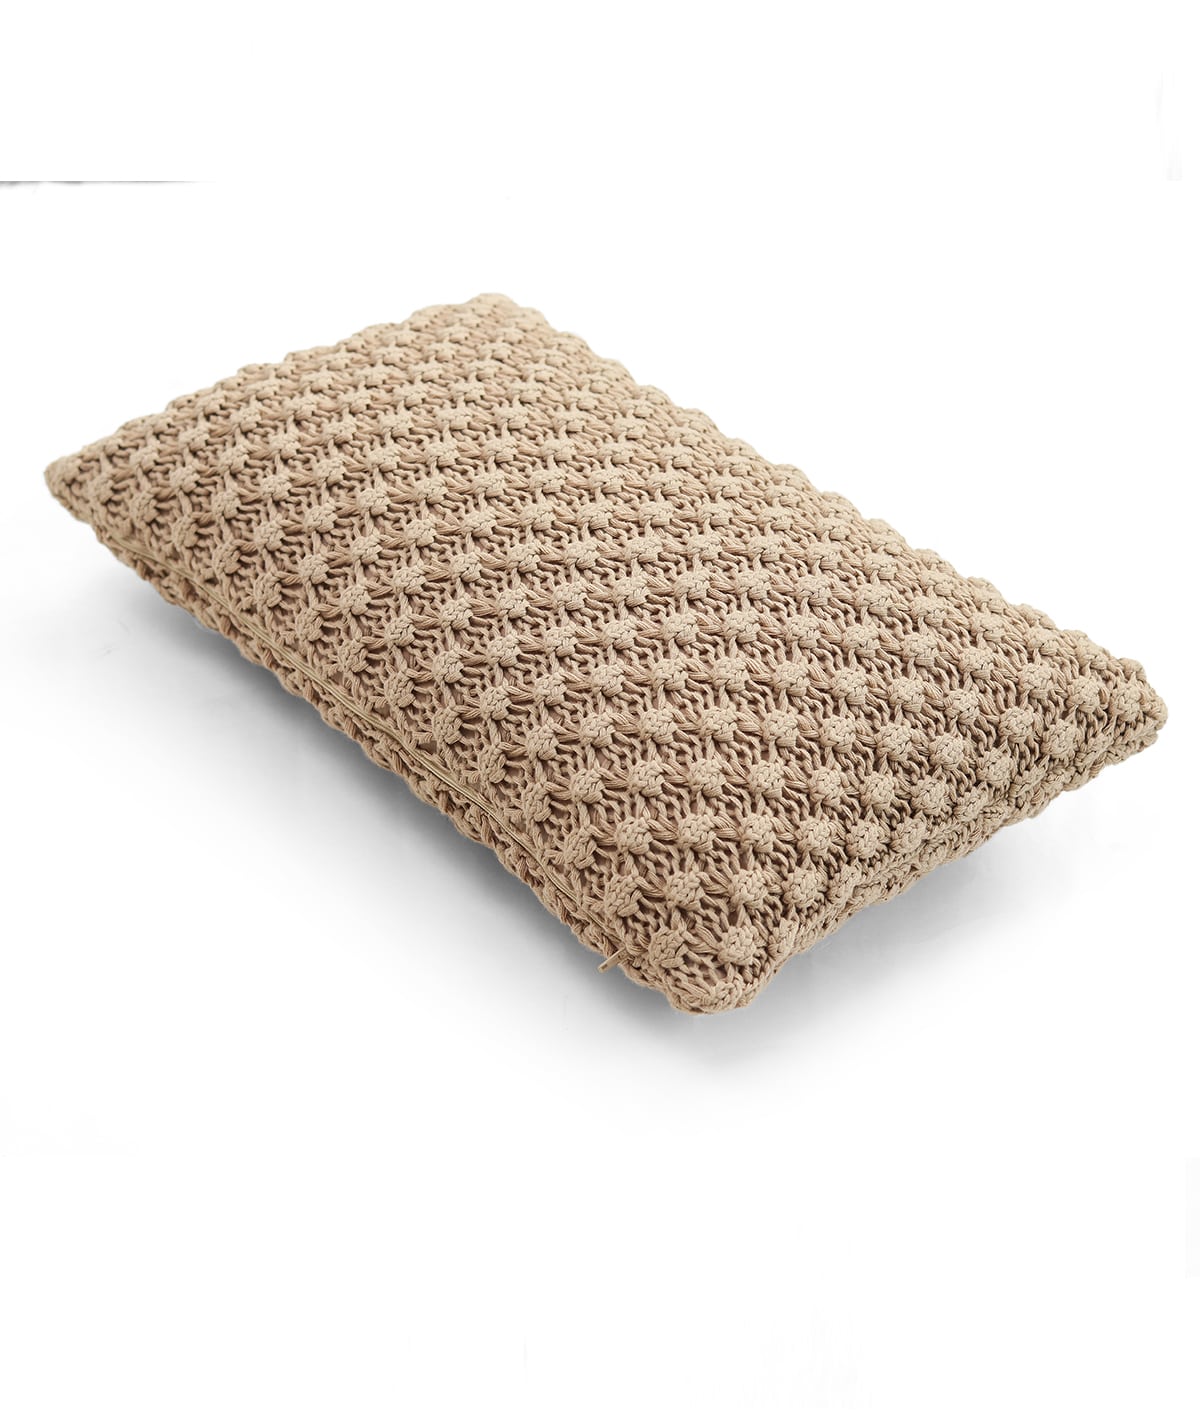 Popcorn Knit Light Beige Melange Cotton Knitted Decorative 12 X 20 Inches Cushion Cover